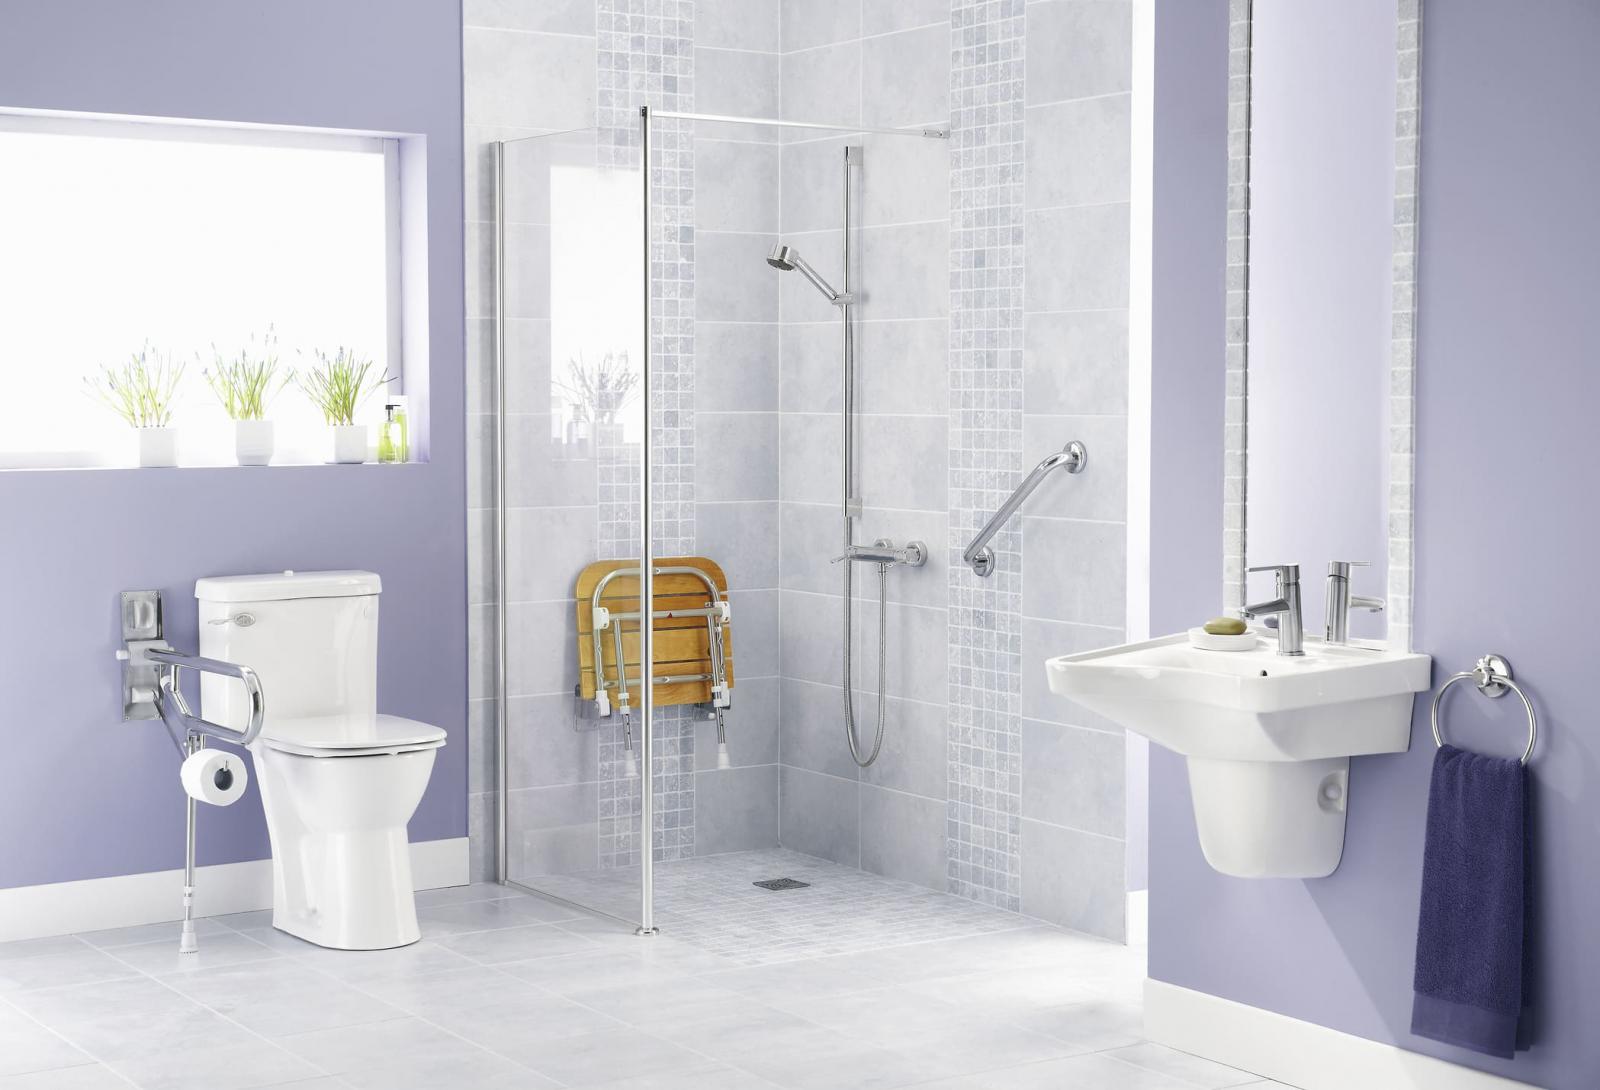 Image of bathroom with bathroom safety products like grab bars and shower seat installed